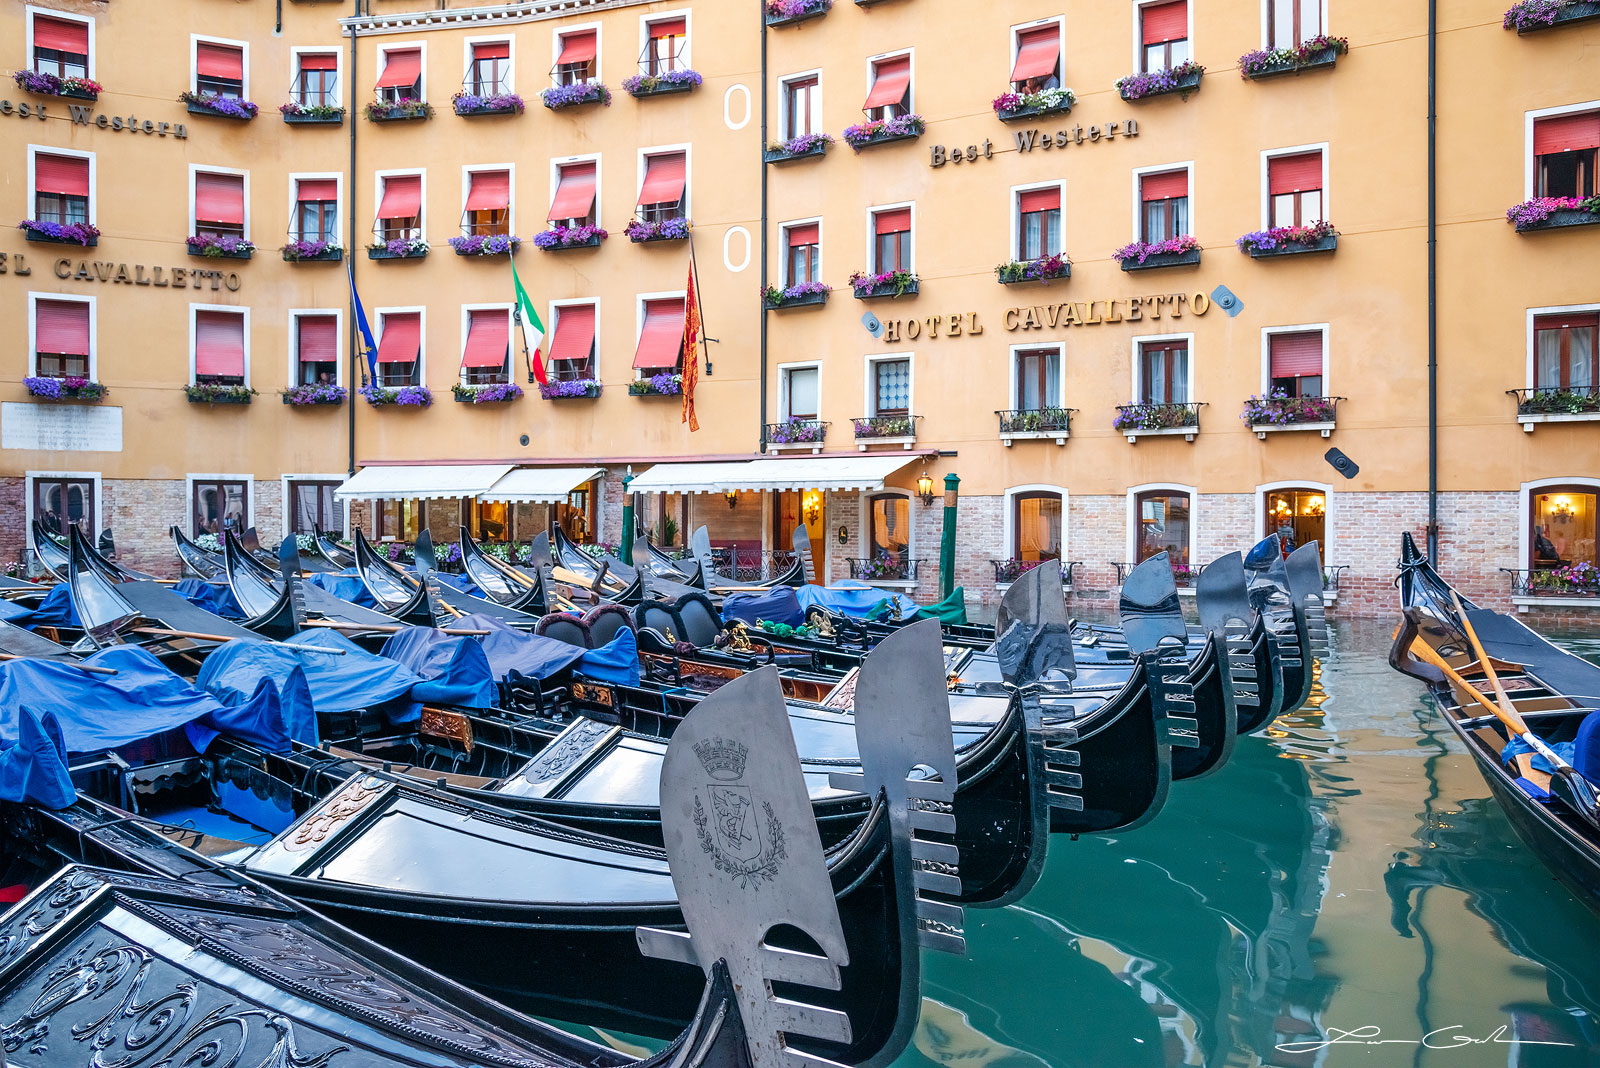 Many gondola boats parked in front of a hotel in Venice, Italy - Gintchin Fine Art